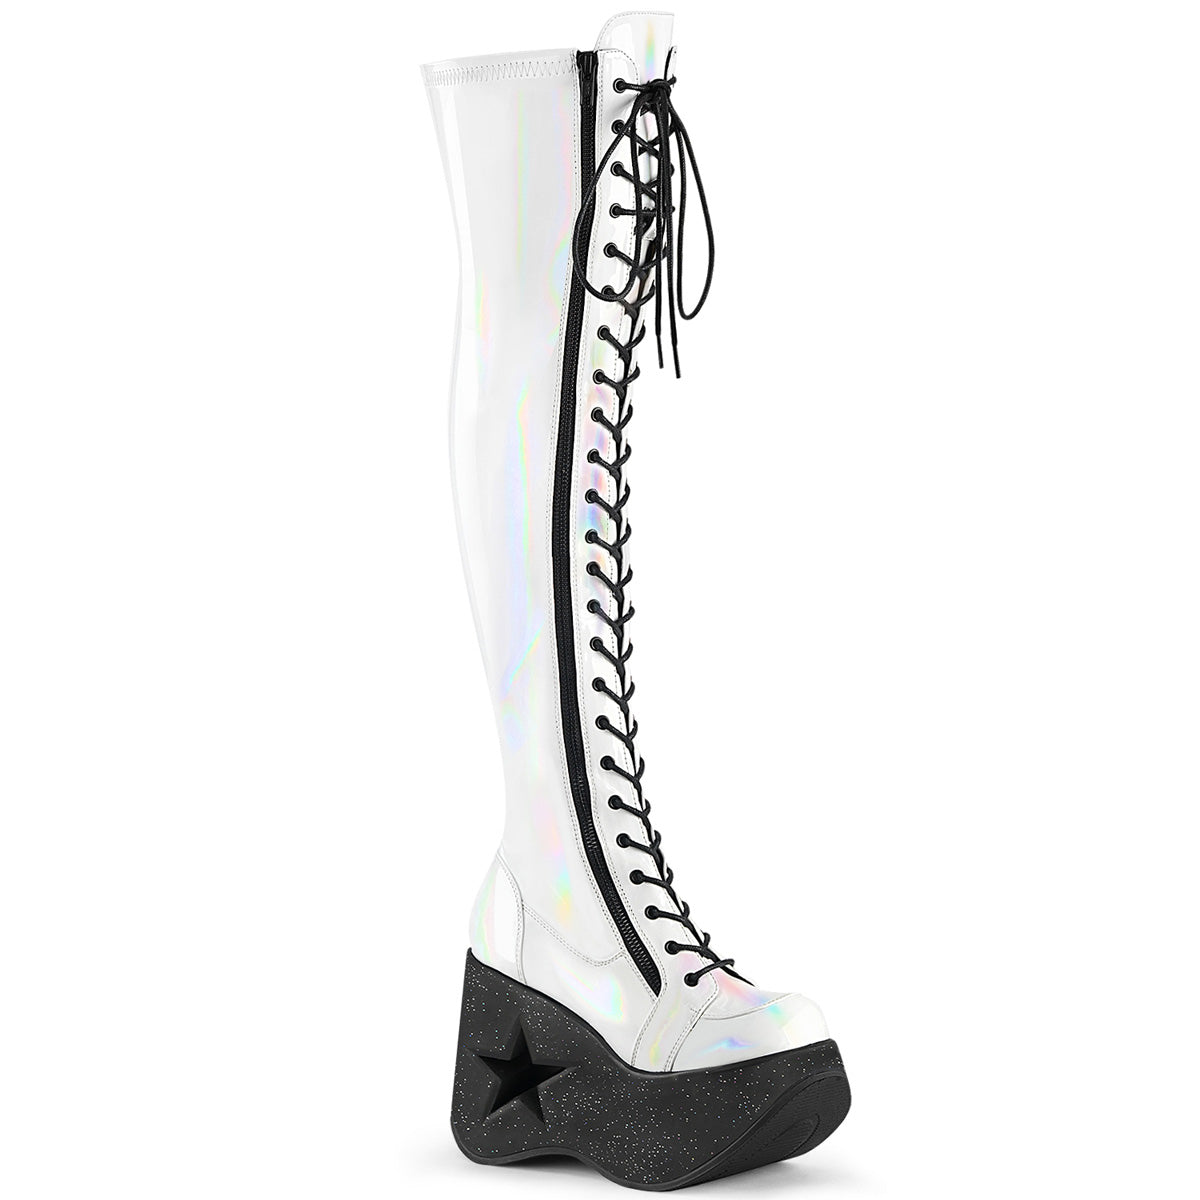 DYNAMITE-300 White Holo Thigh Boots